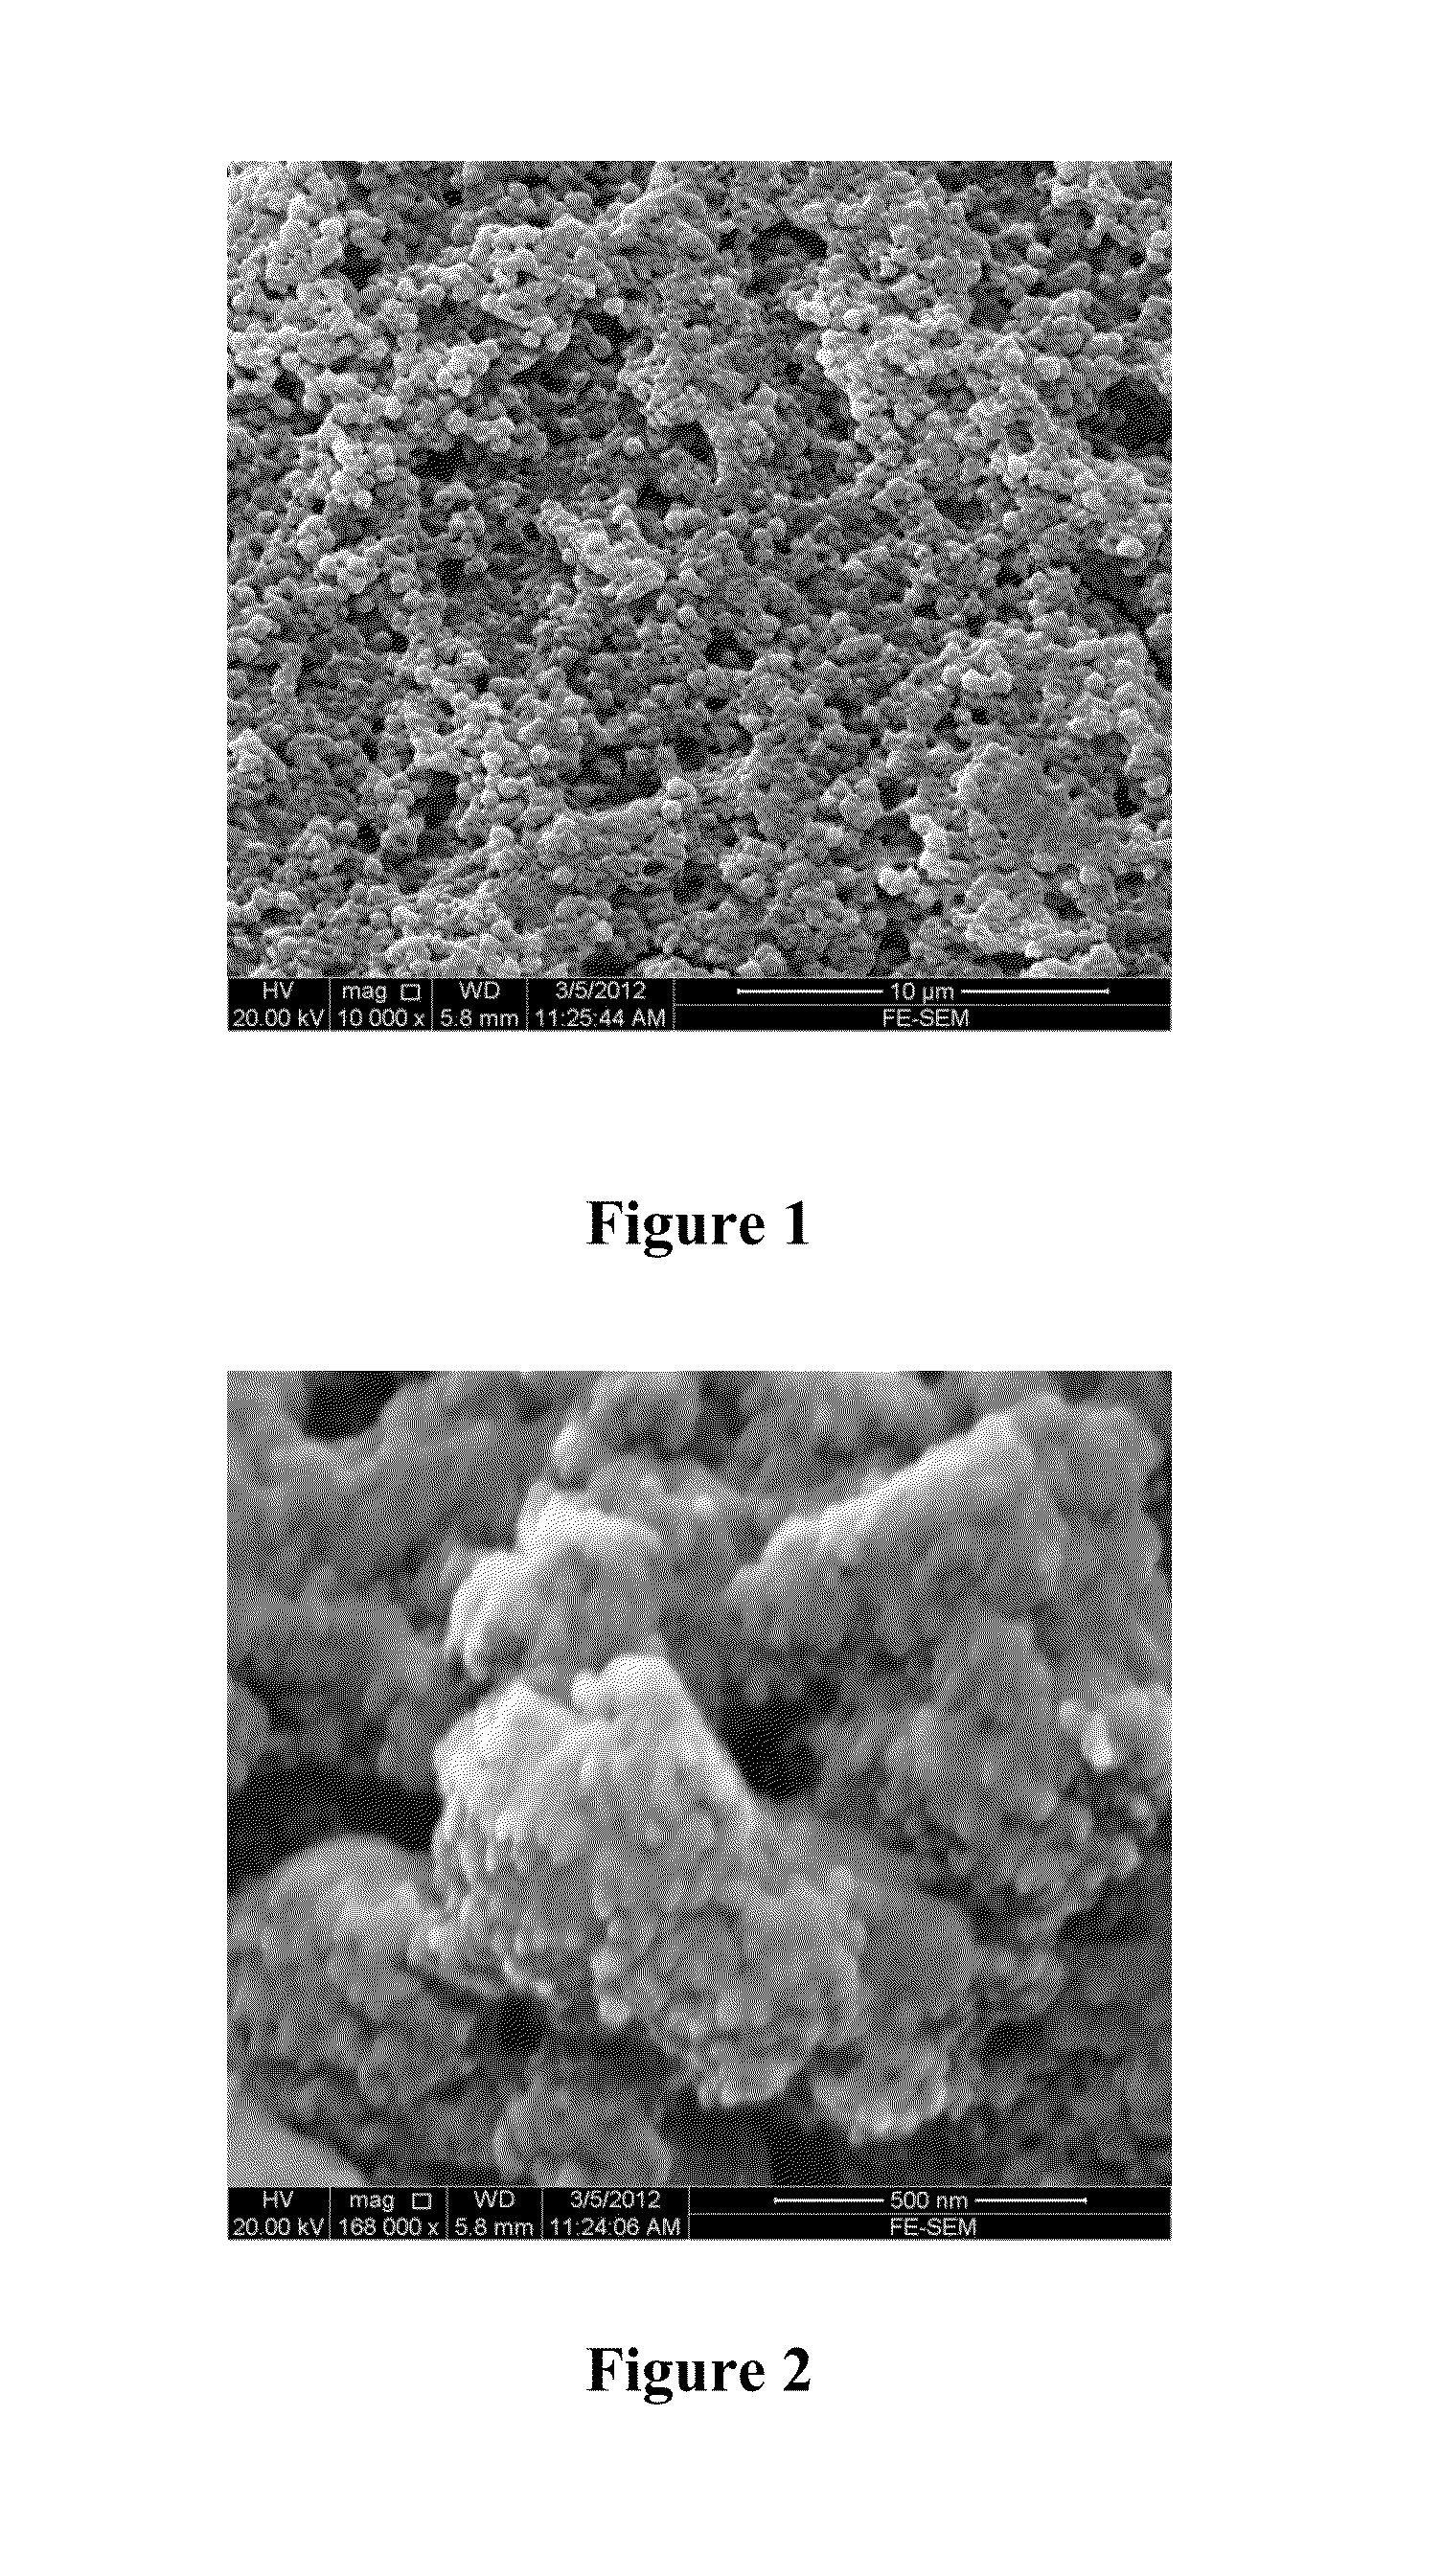 Self-healing superhydrophobic coating composition and method of preparation